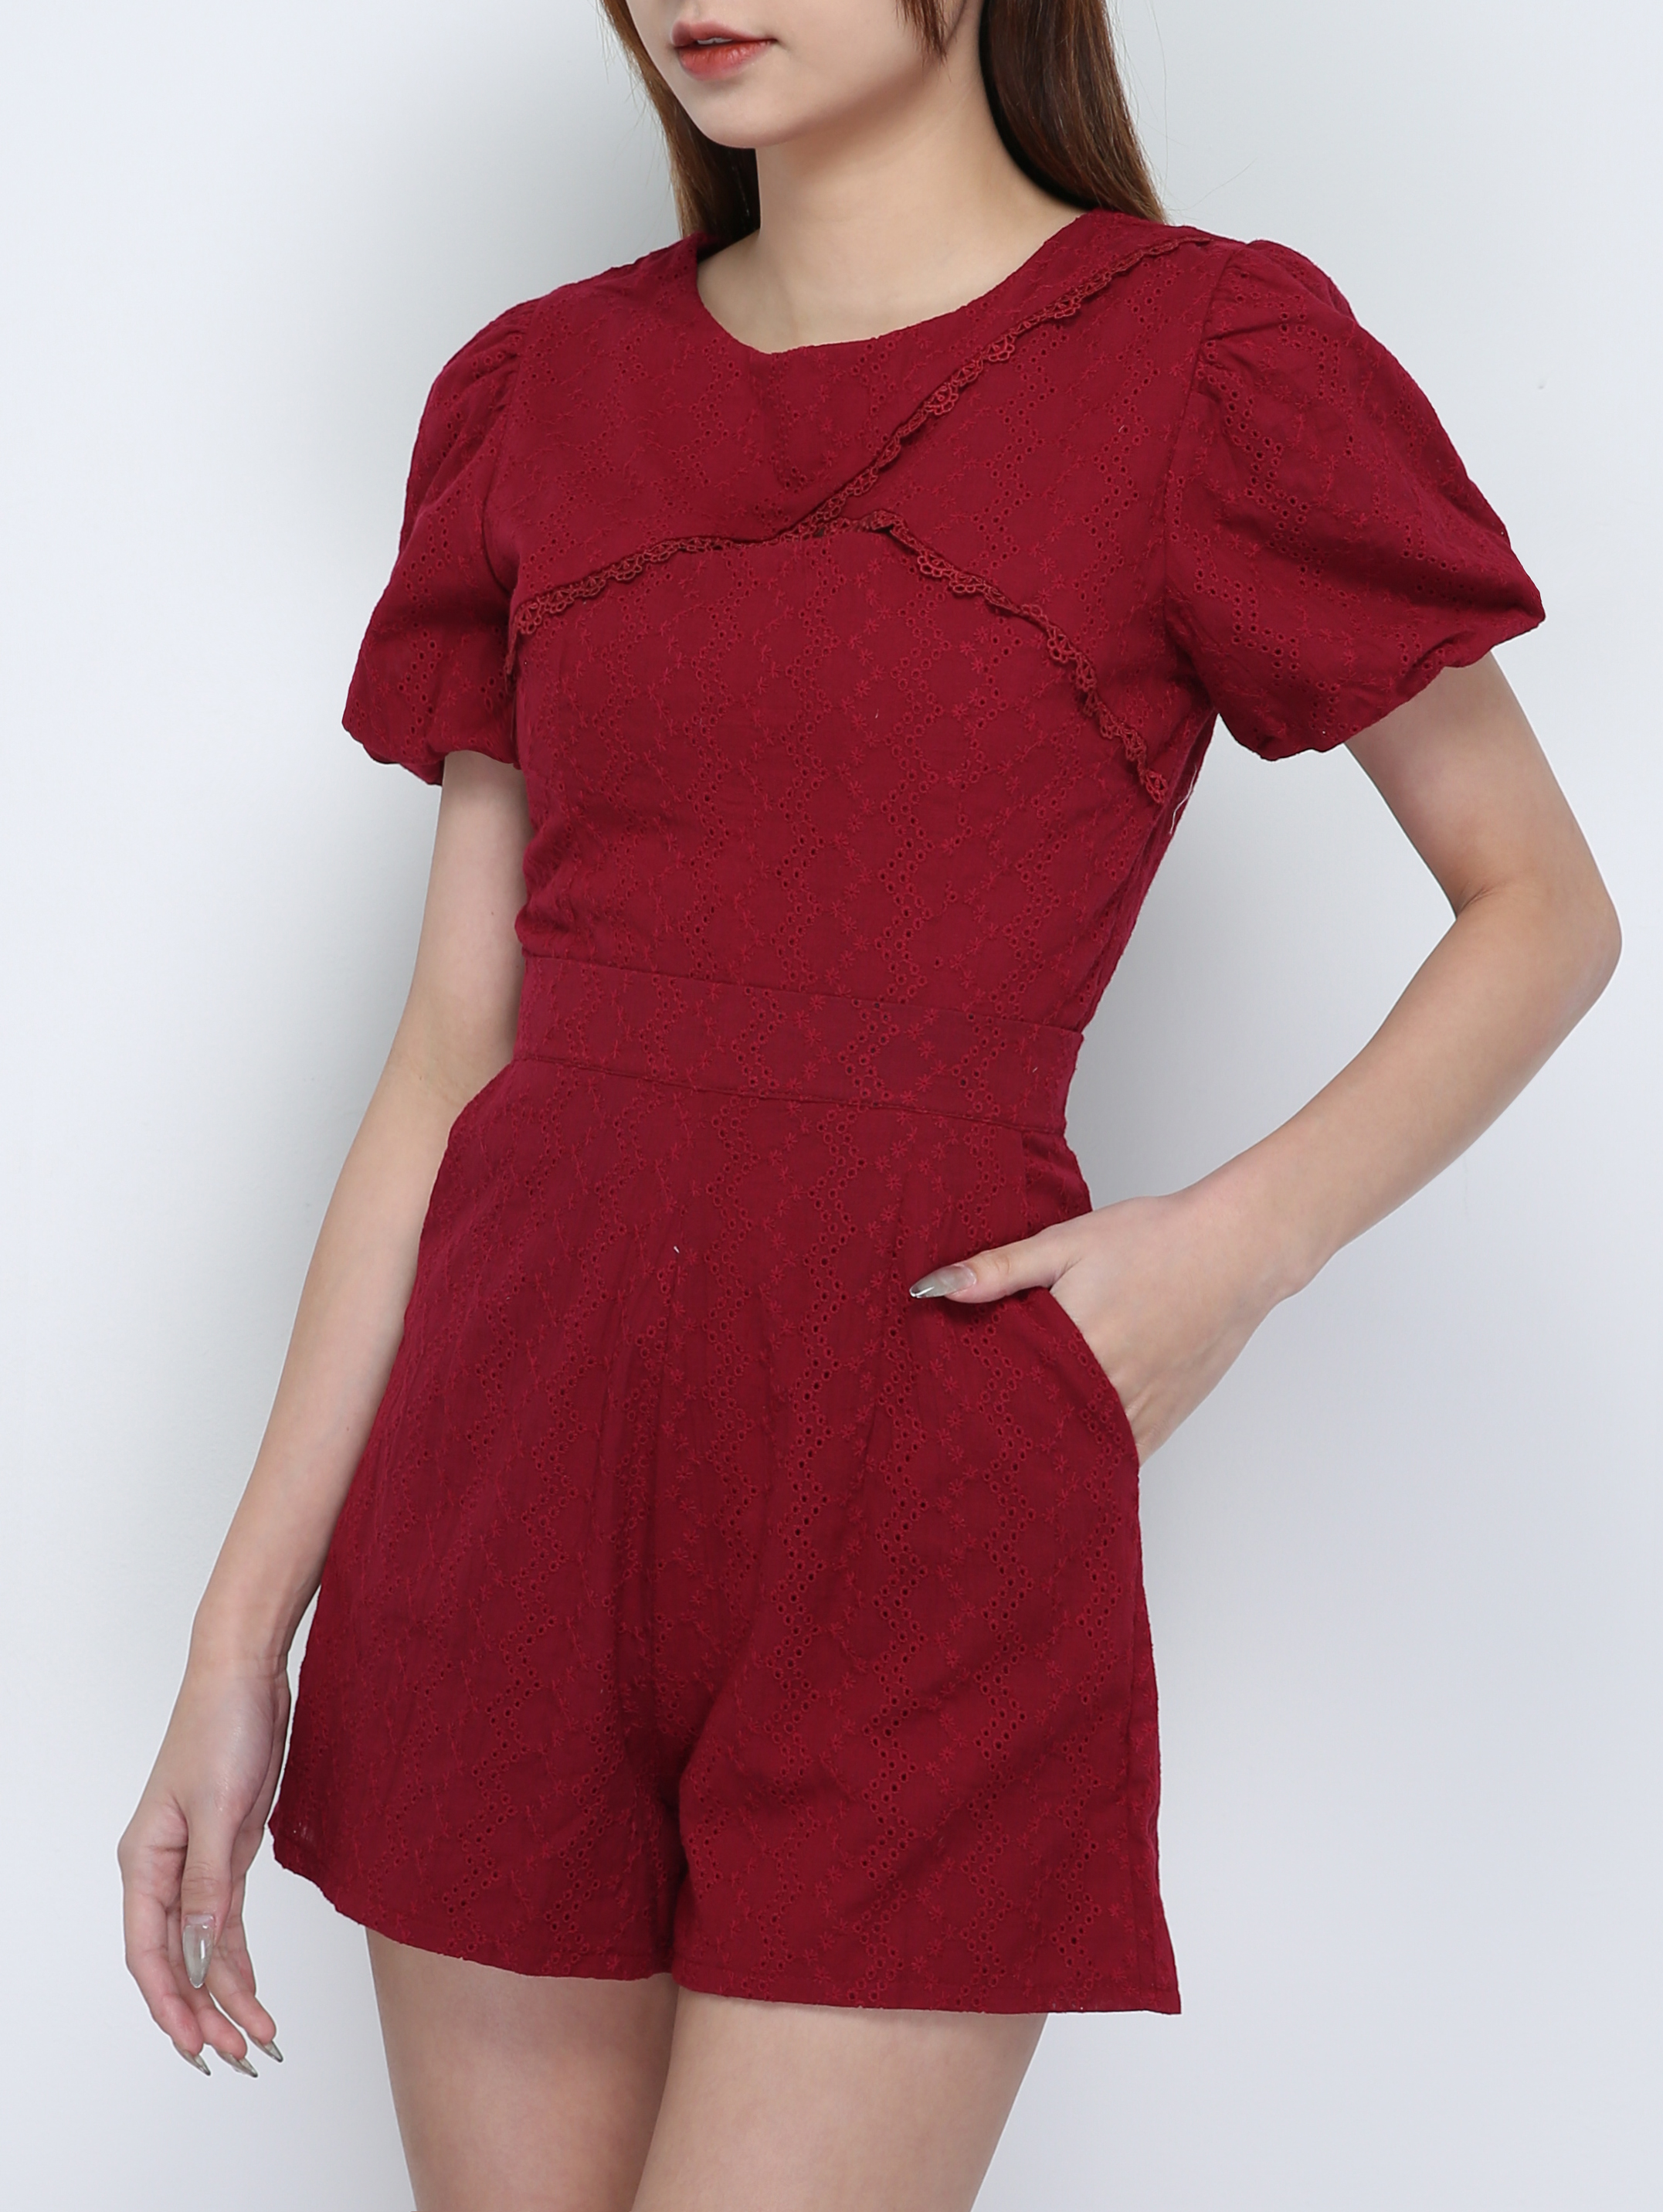 Cheongsam Style Wrap With Front Hole Dress 18574